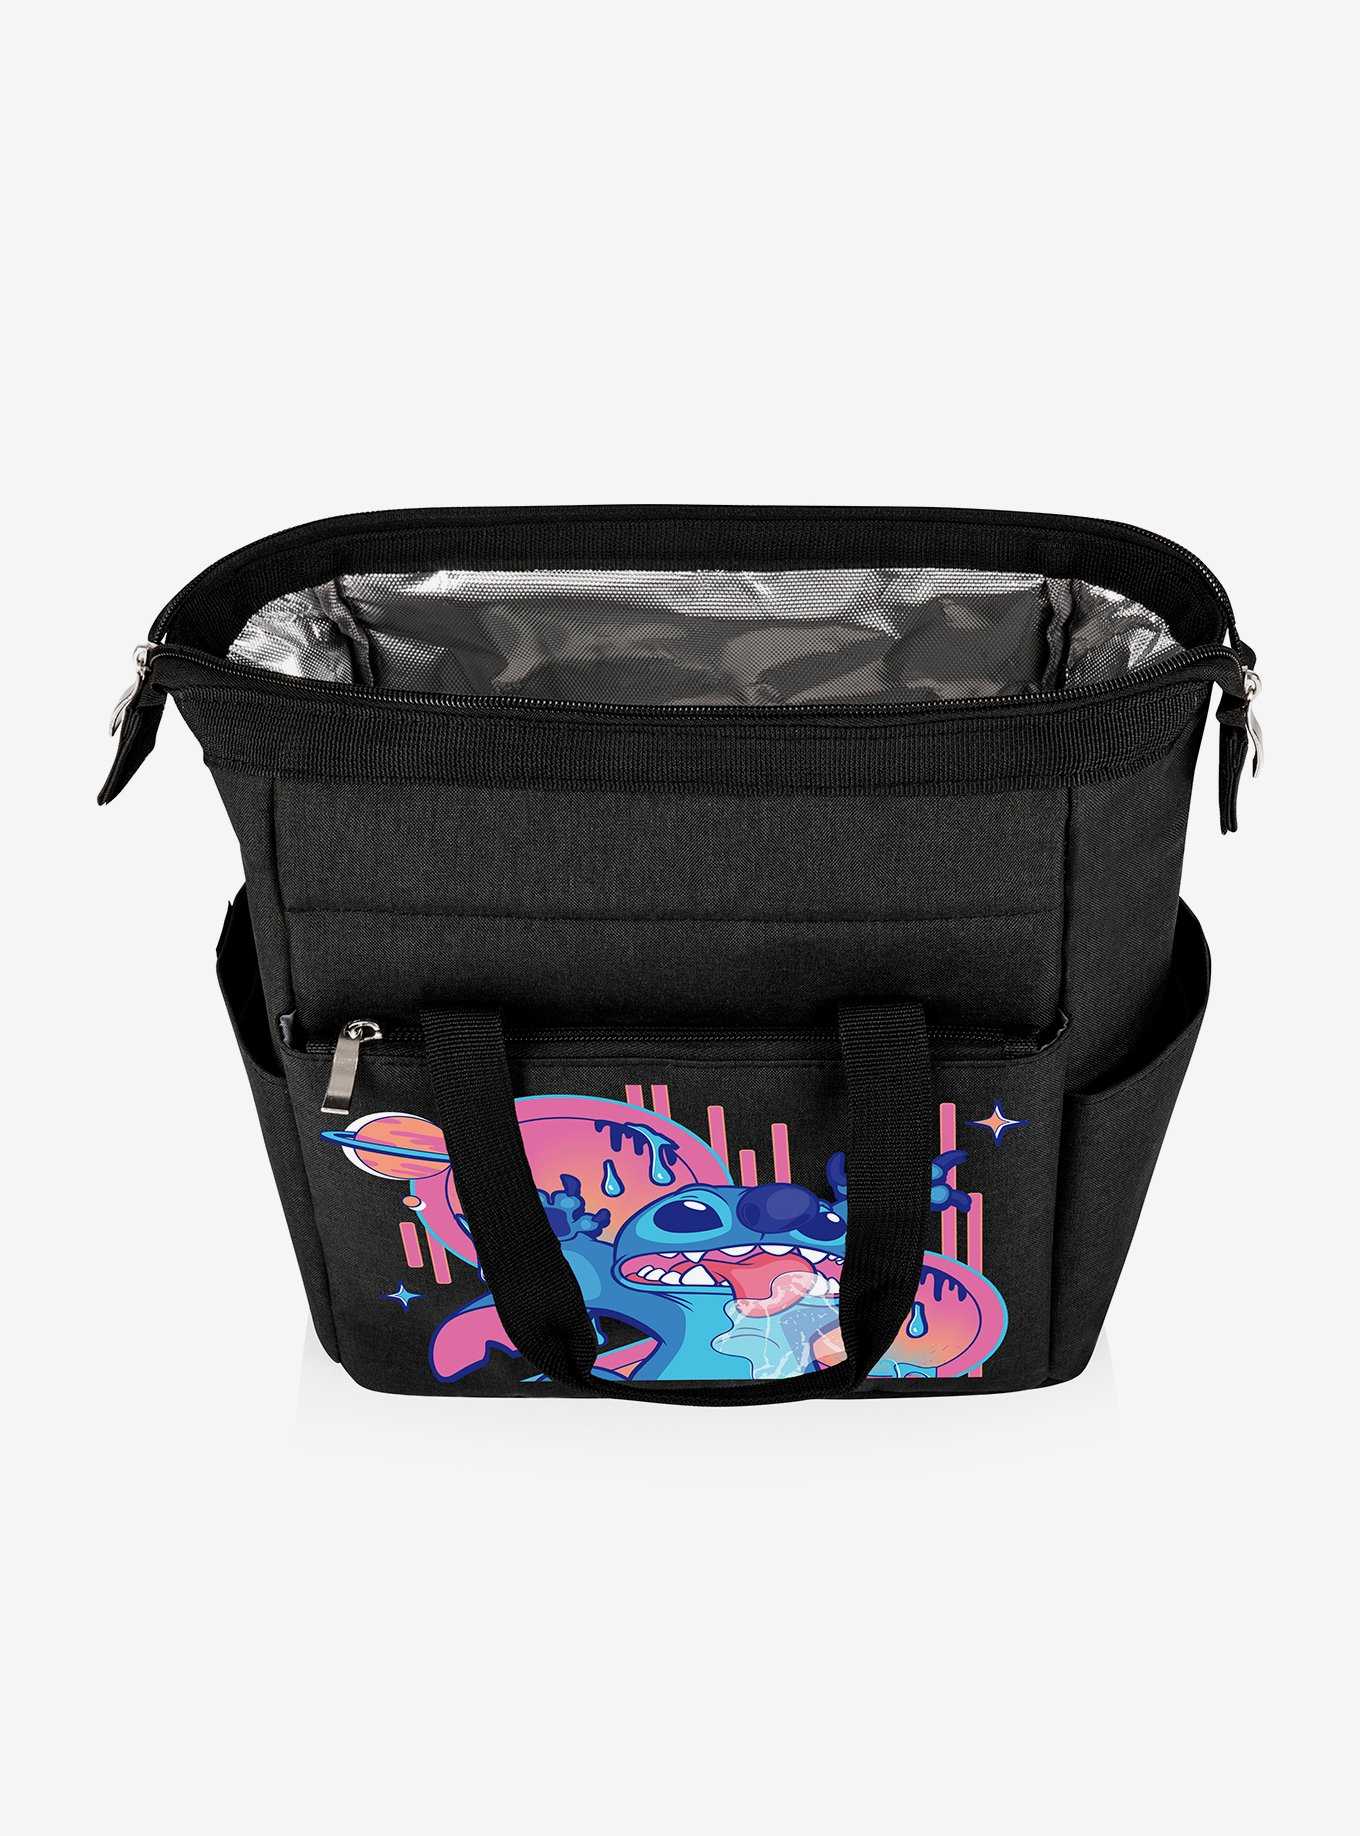 Disney Lilo and Stitch Lunch Cooler Hands Up Black, , hi-res